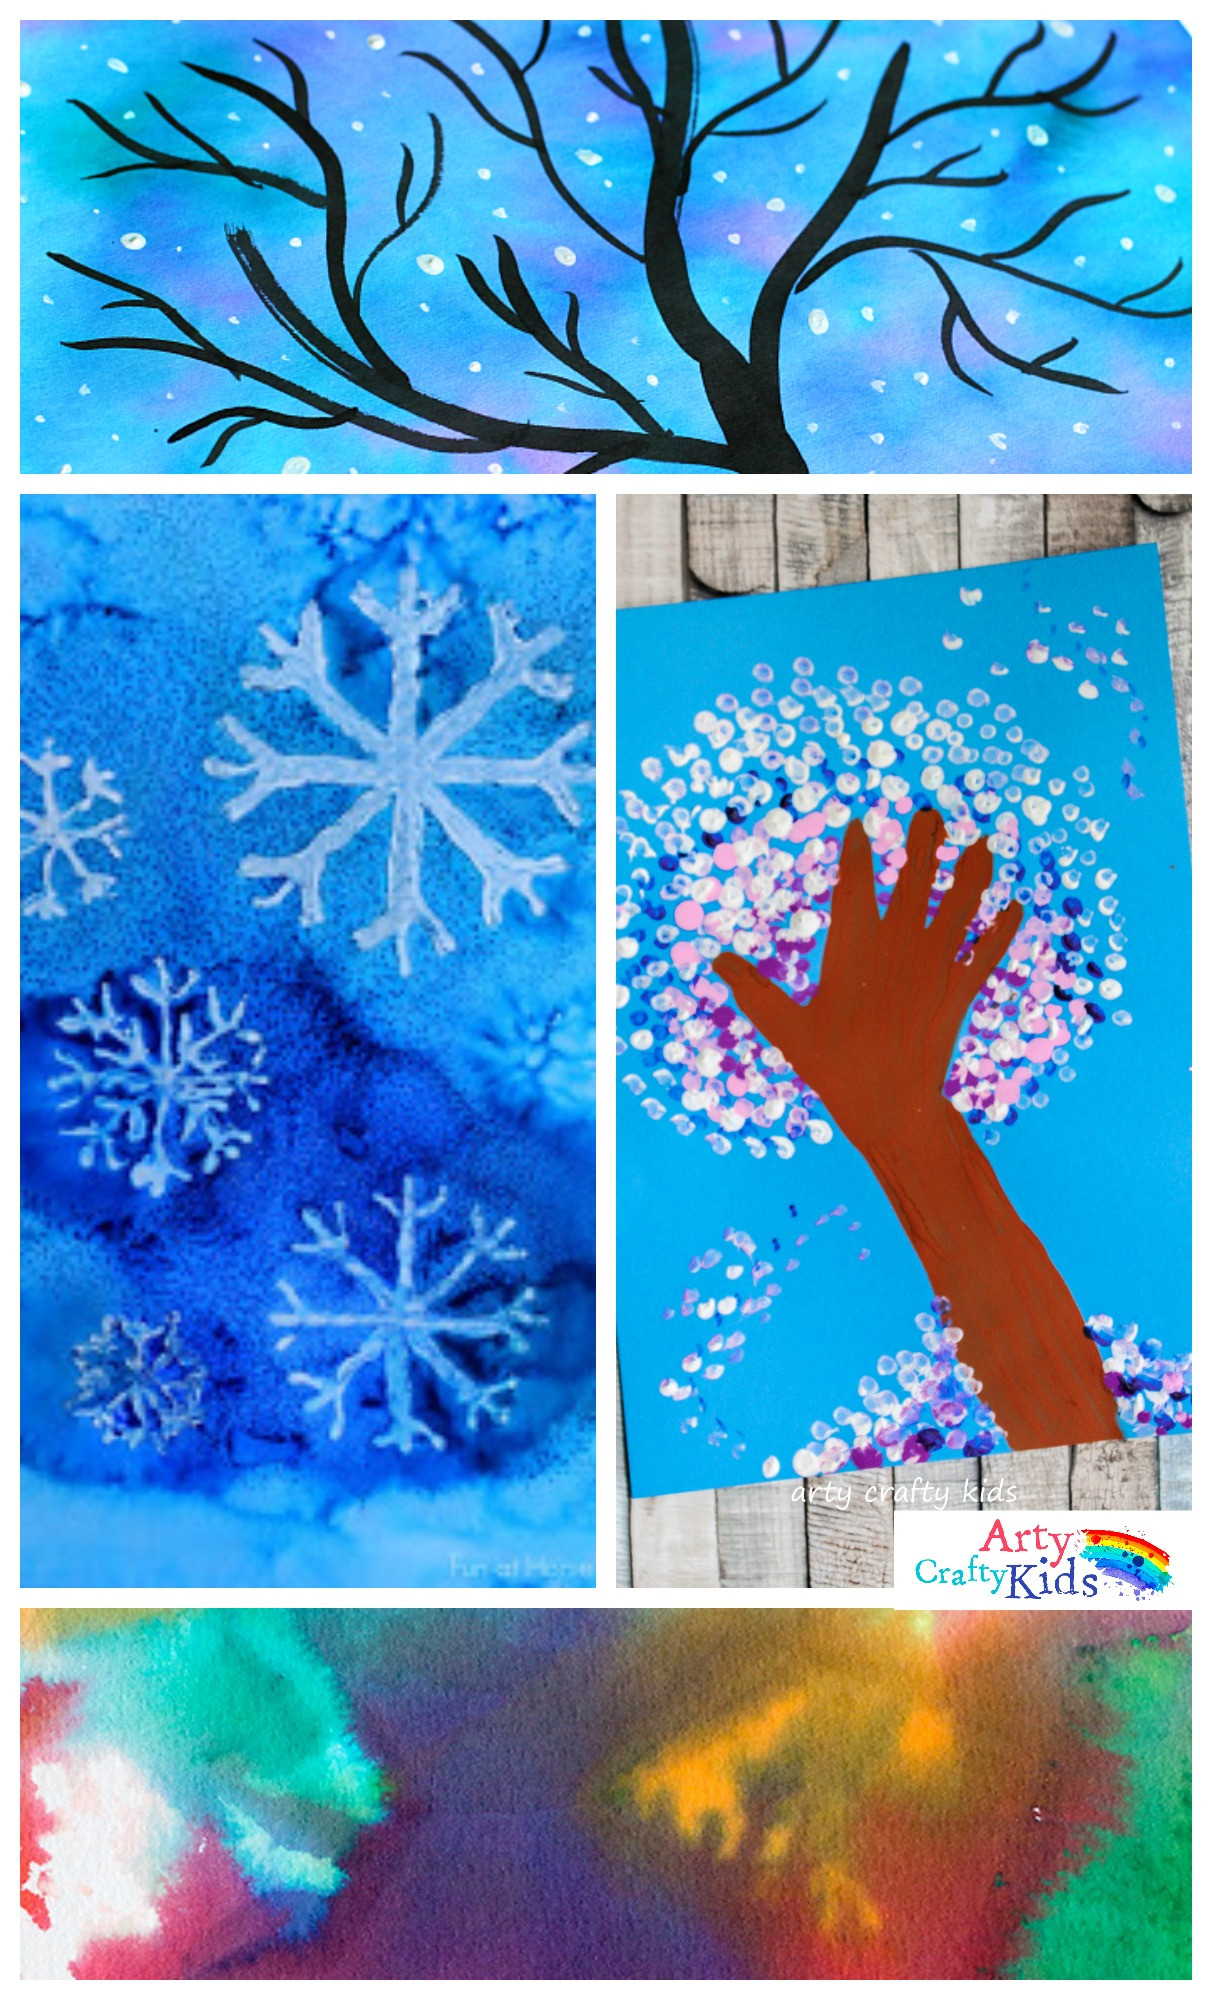 Children Art And Craft Ideas
 14 Wonderful Winter Art Projects for Kids Arty Crafty Kids